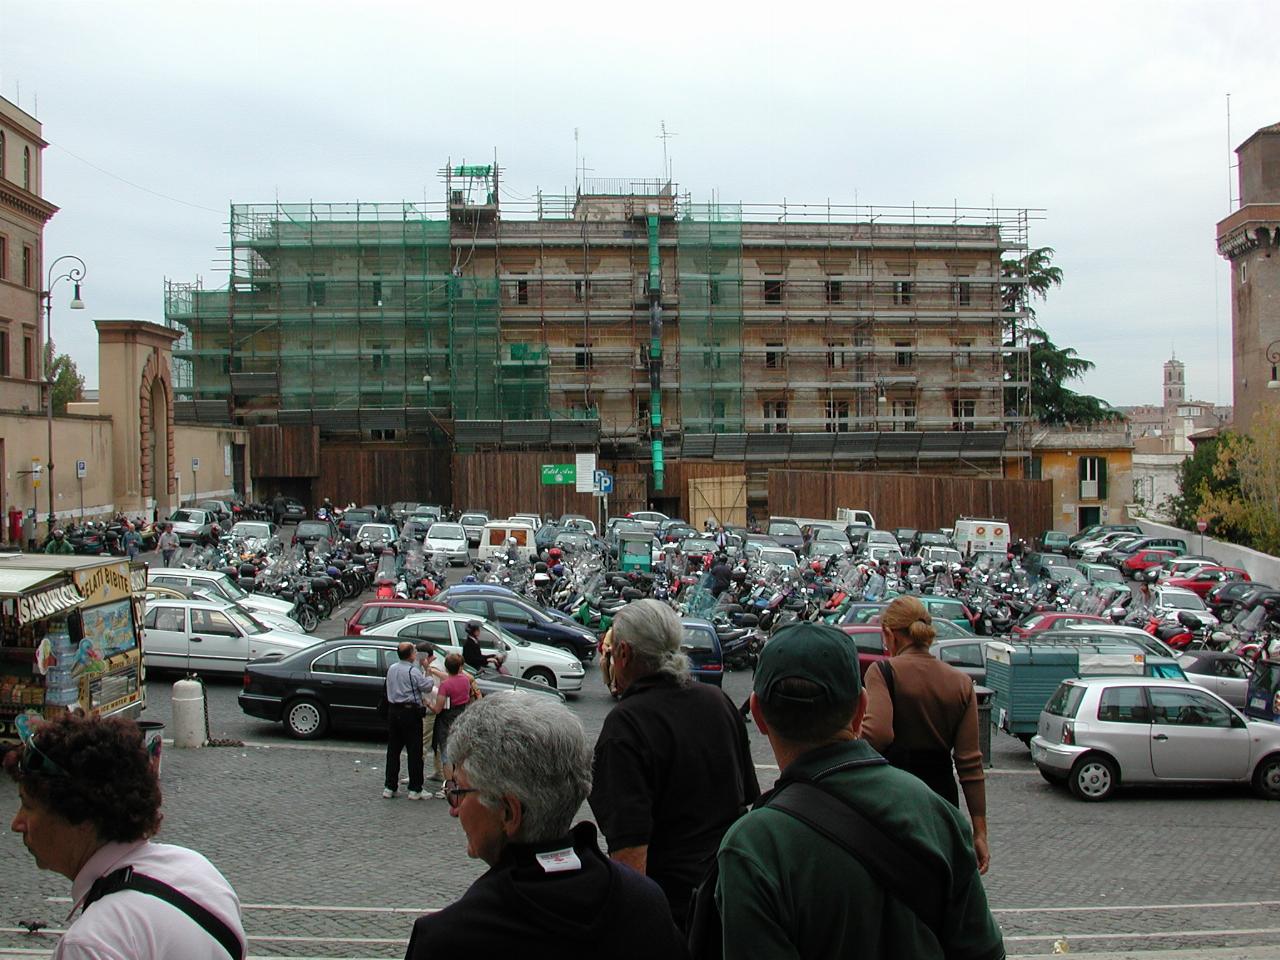 Parking lot in front of Saint Peter in Chains Basilica